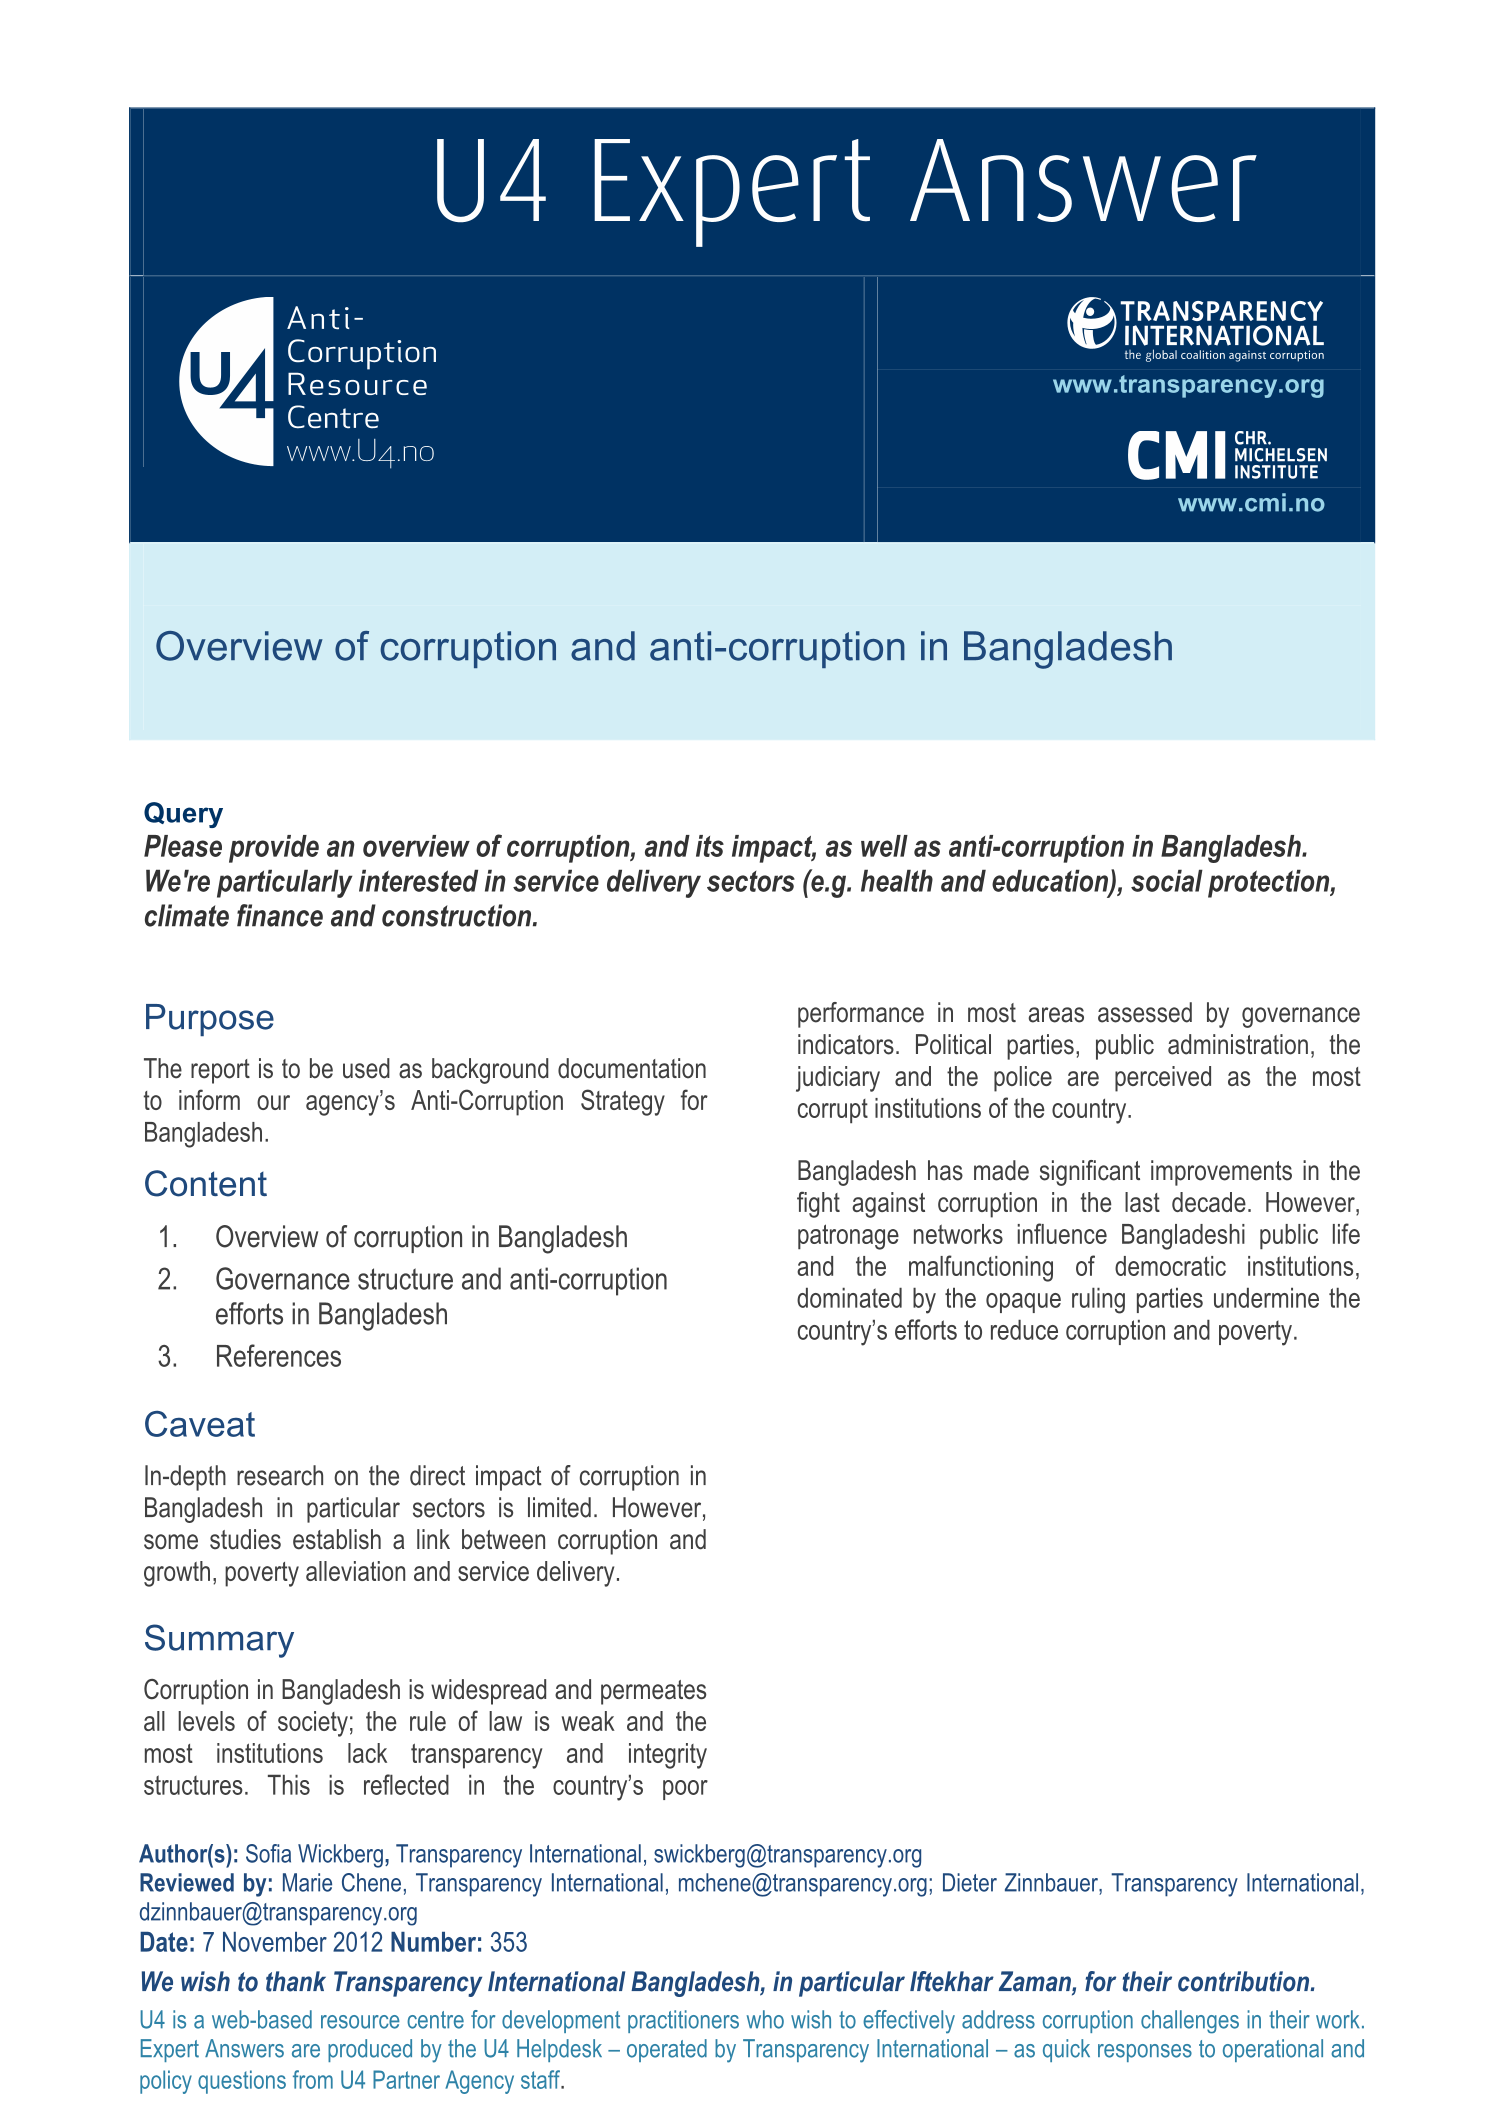 Overview of corruption and anti-corruption in Bangladesh